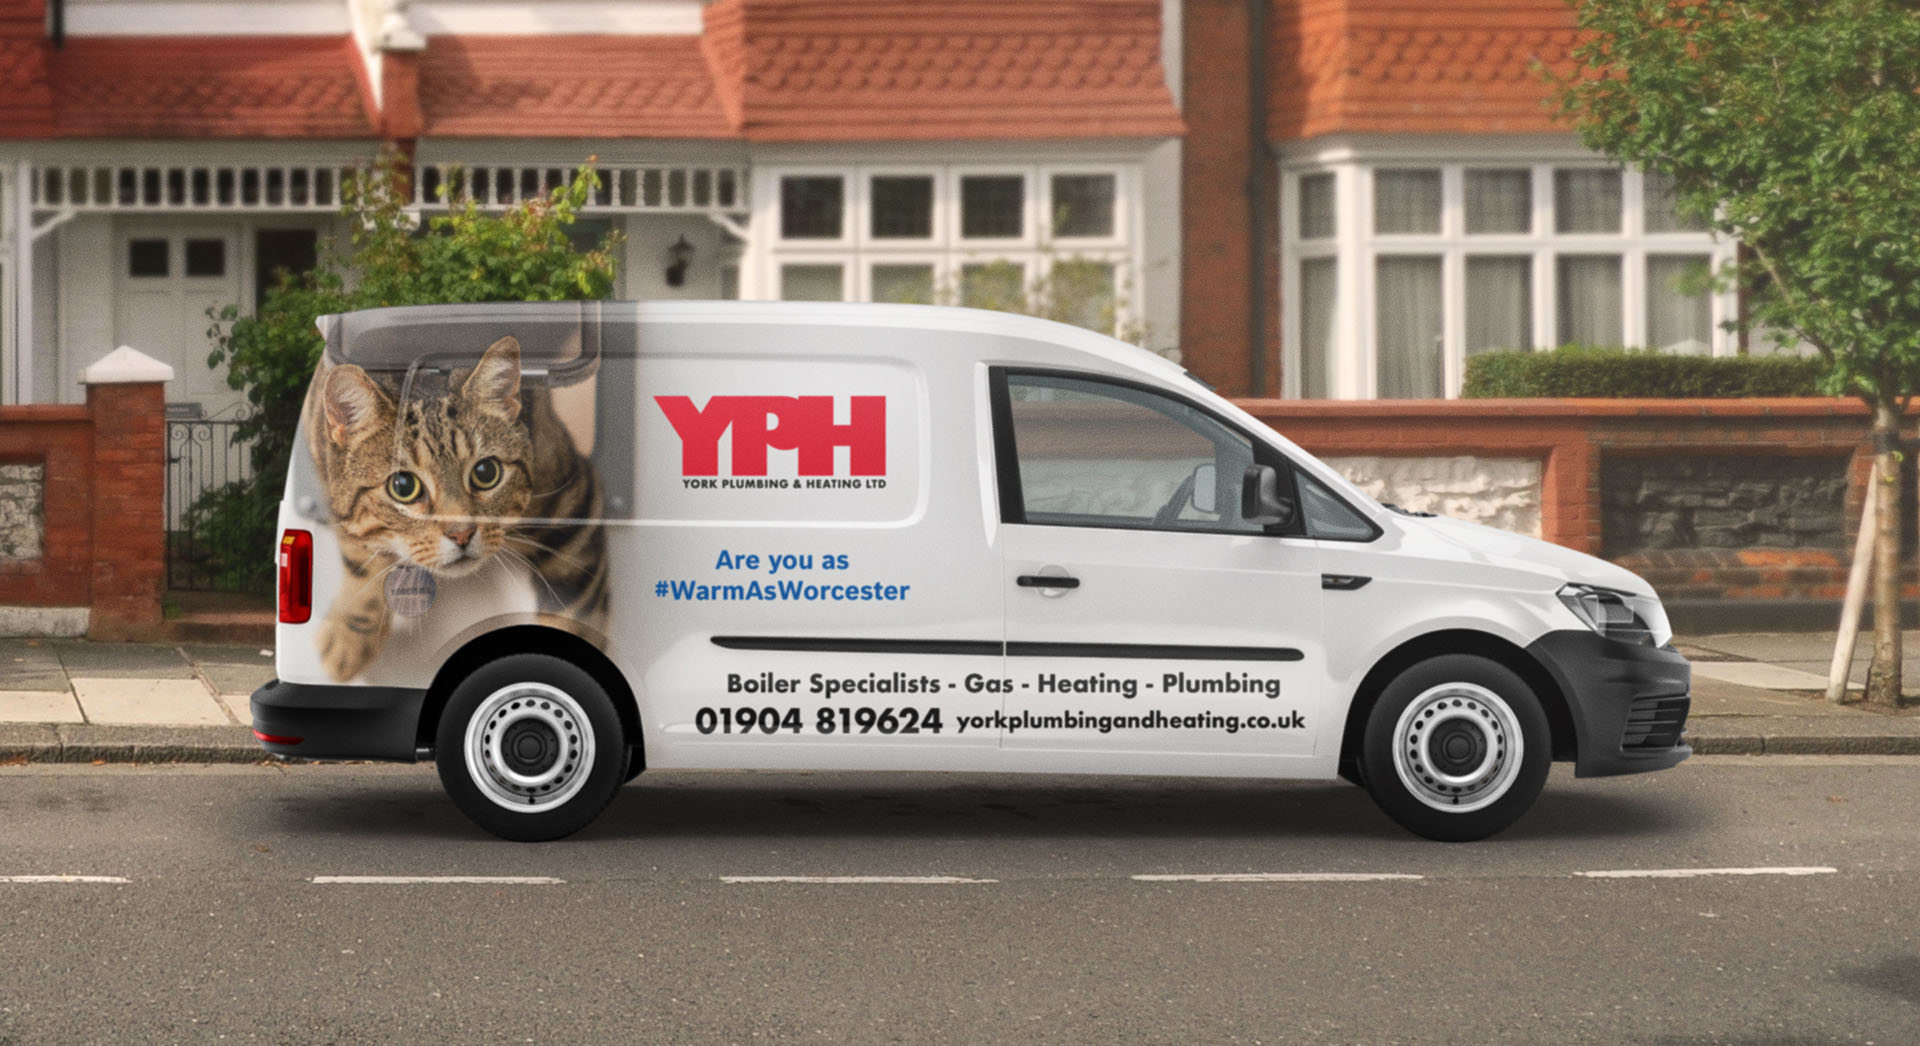 Come-the-glorious-day-worcester-bosch-installer-van-copy